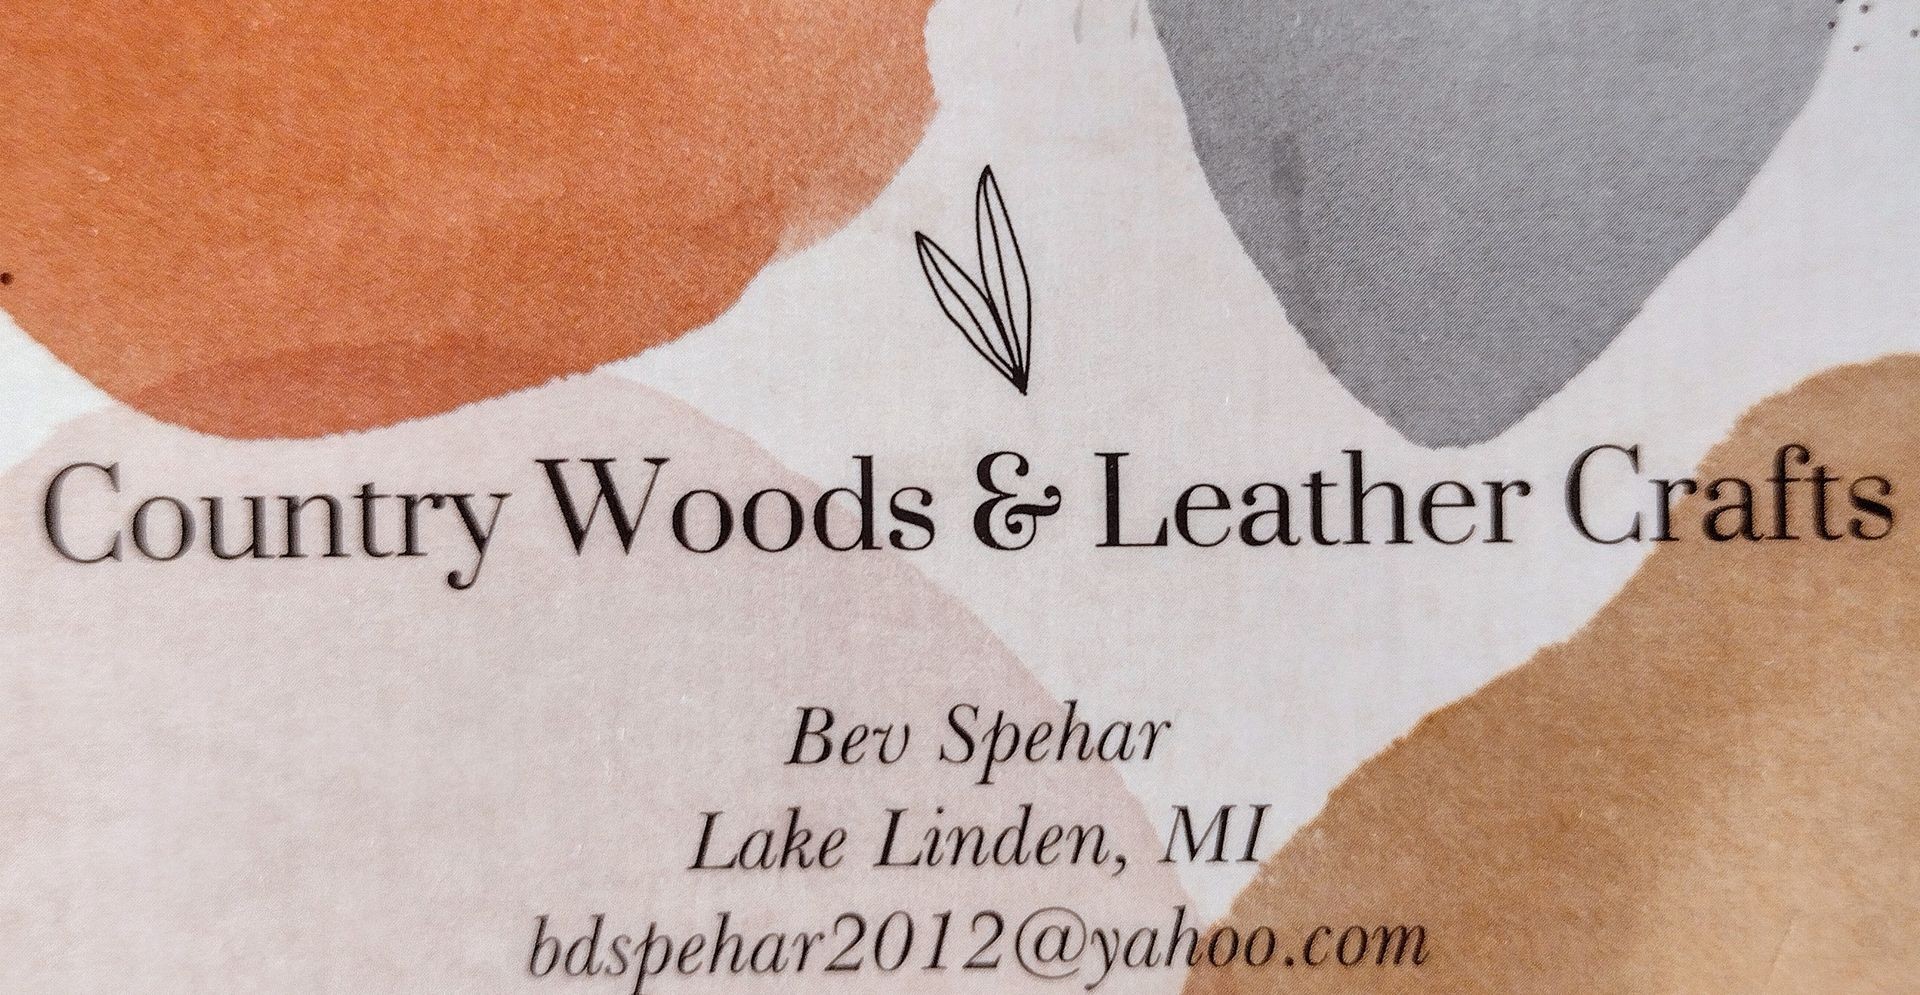 Country Woods & Leather Crafts